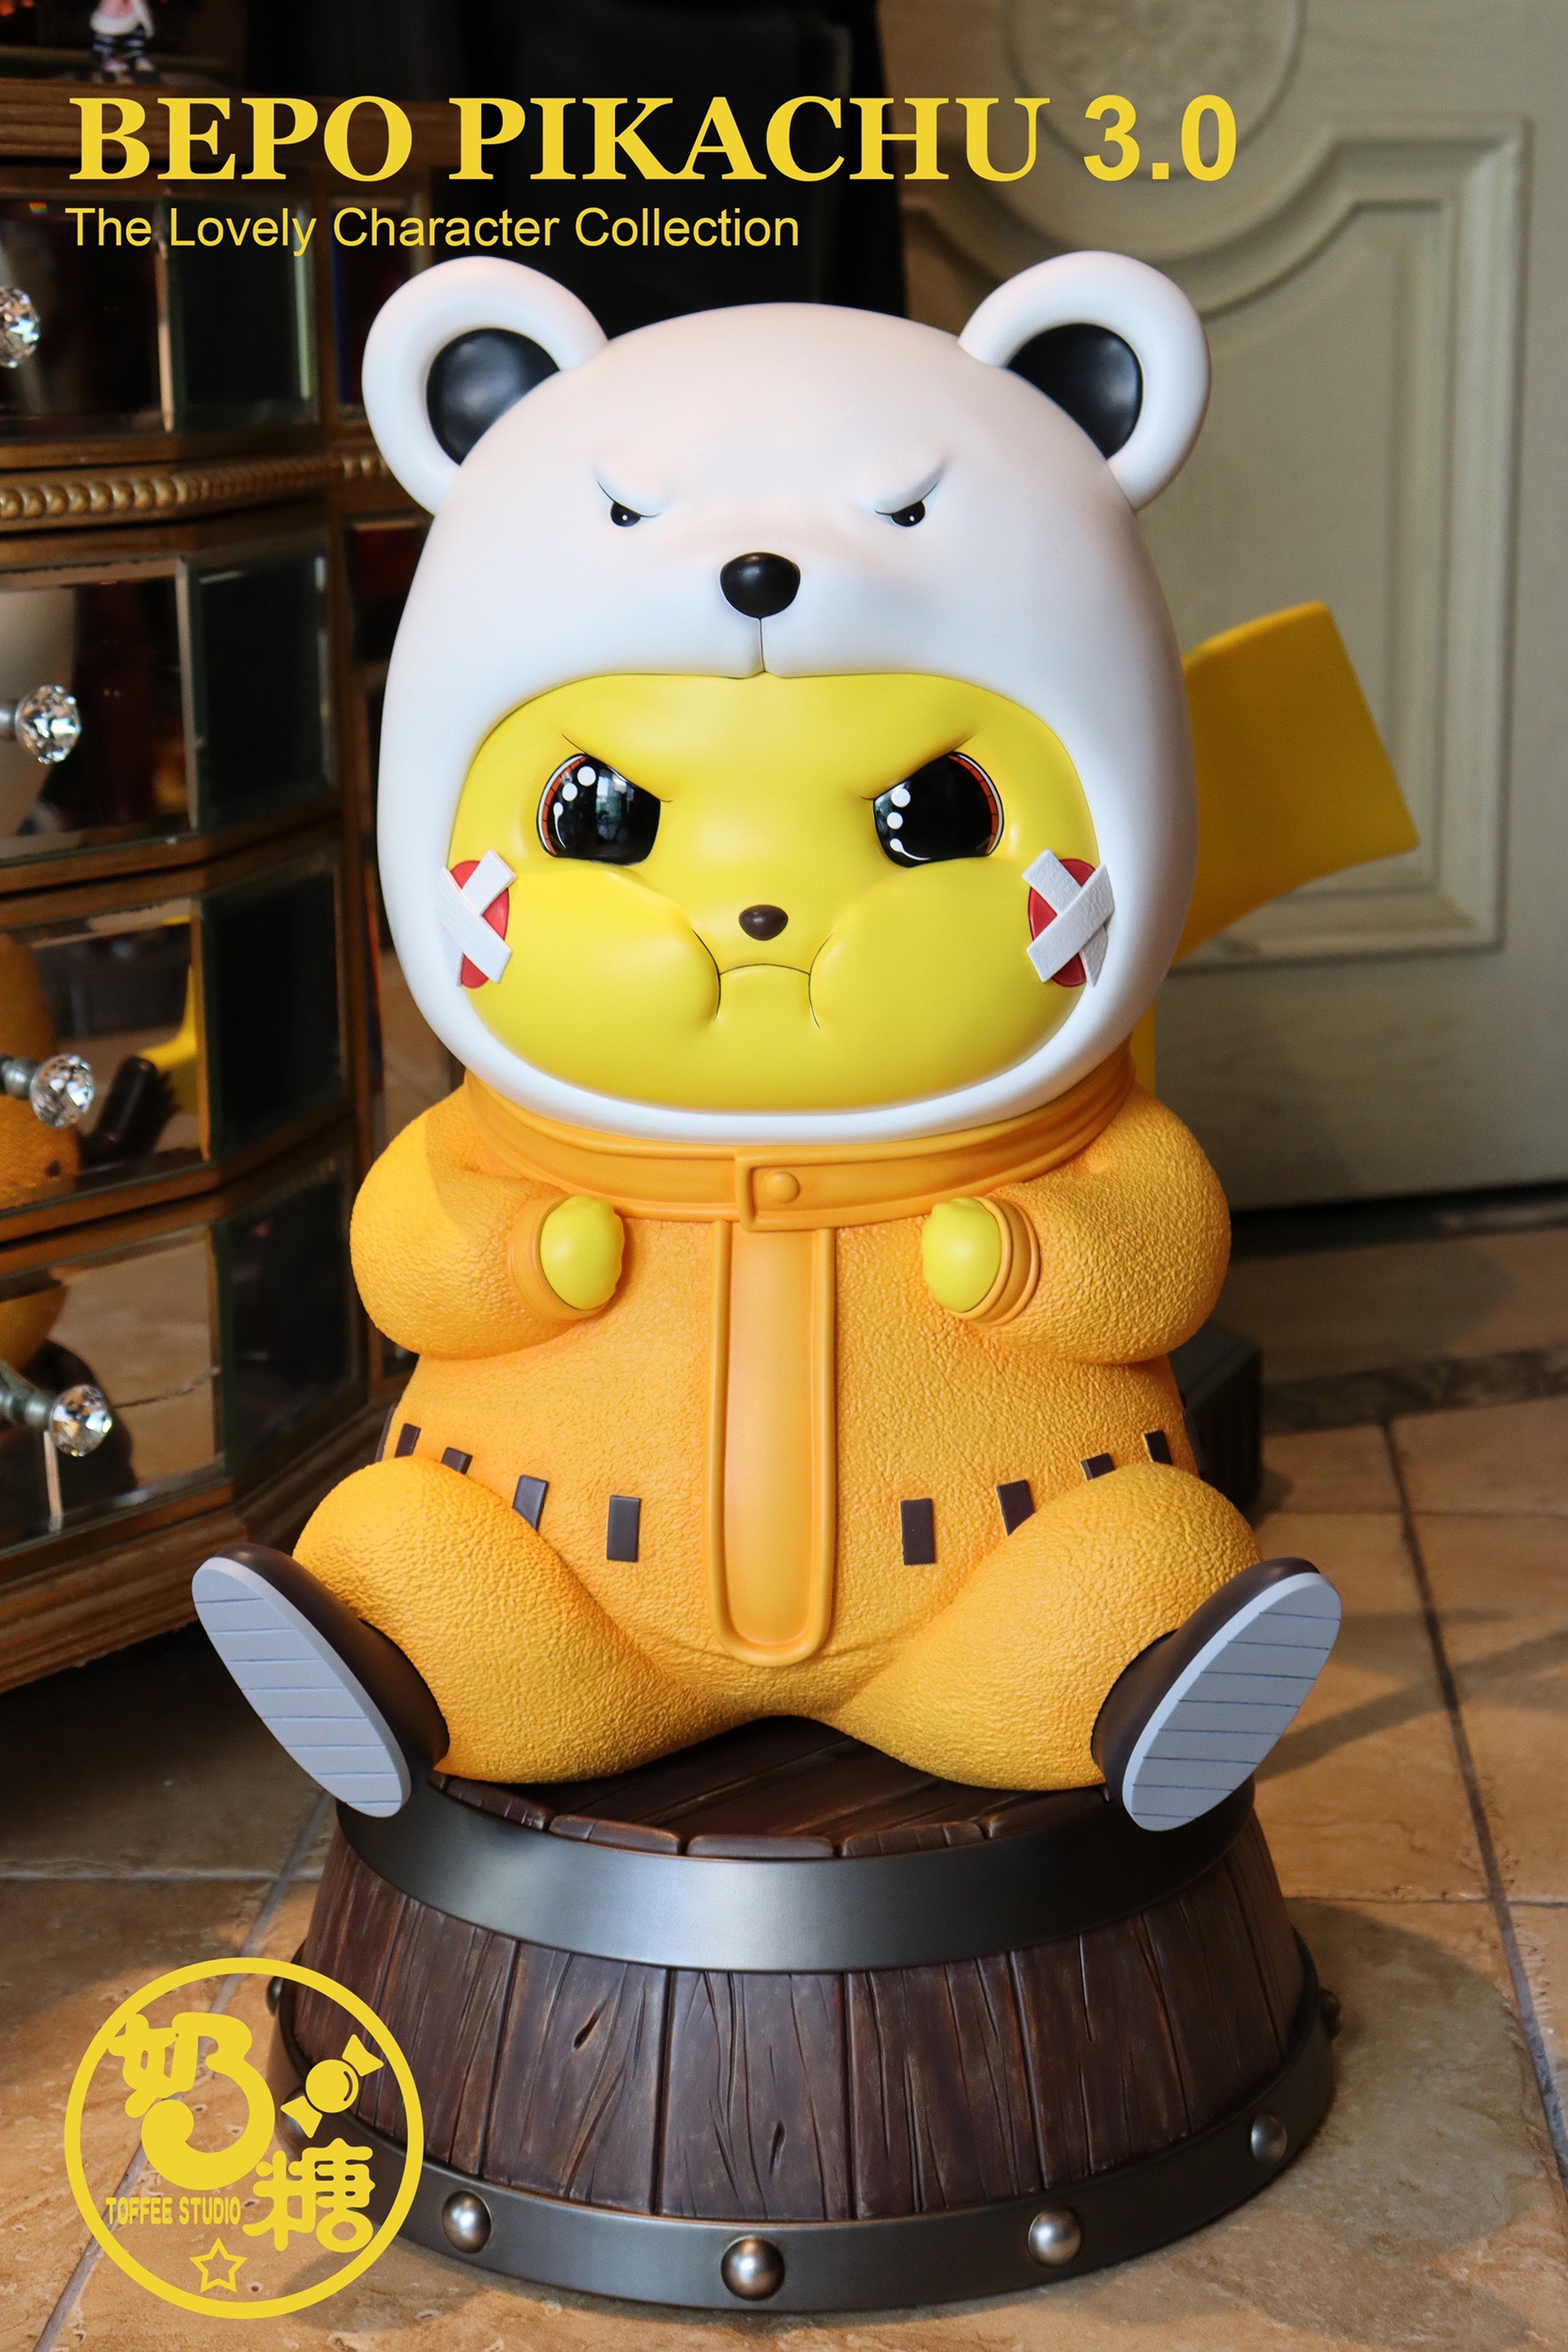 Pikachu x Bepo 3.0 by Toffee Studio (มัดจำ) [[SOLD OUT]]